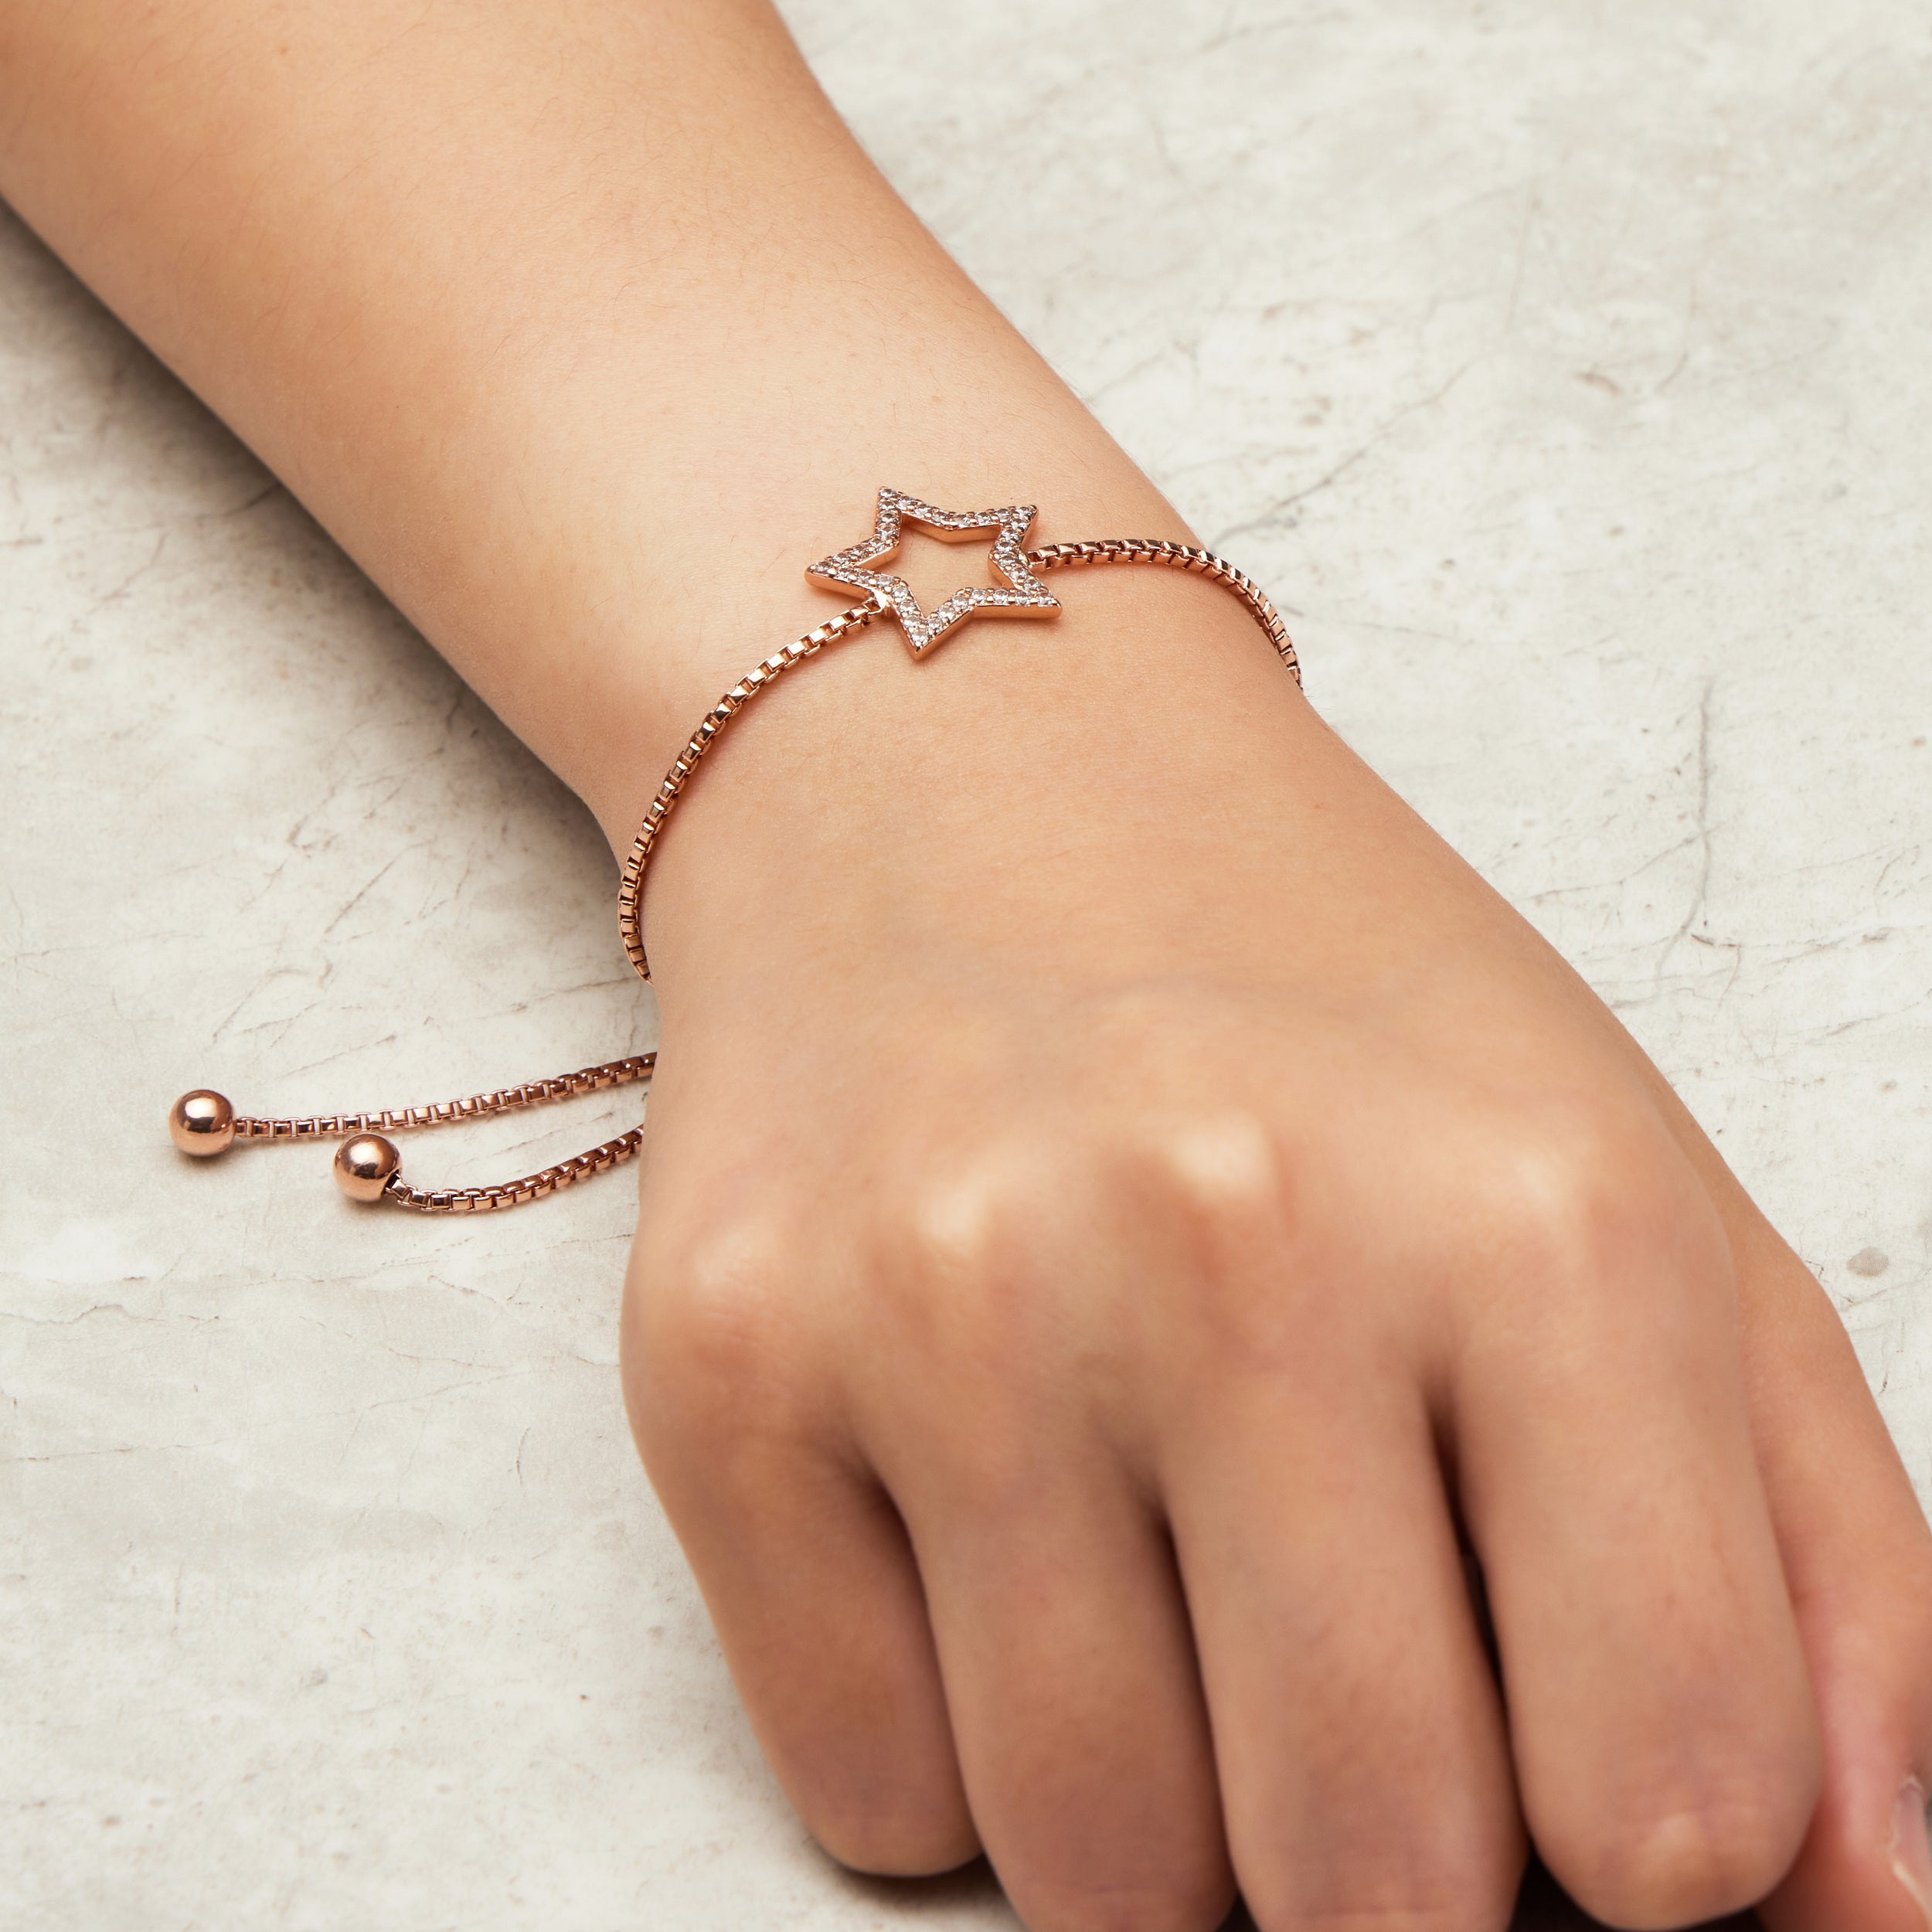 Rose Gold Plated Star Friendship Bracelet Created with Zircondia® Crystals